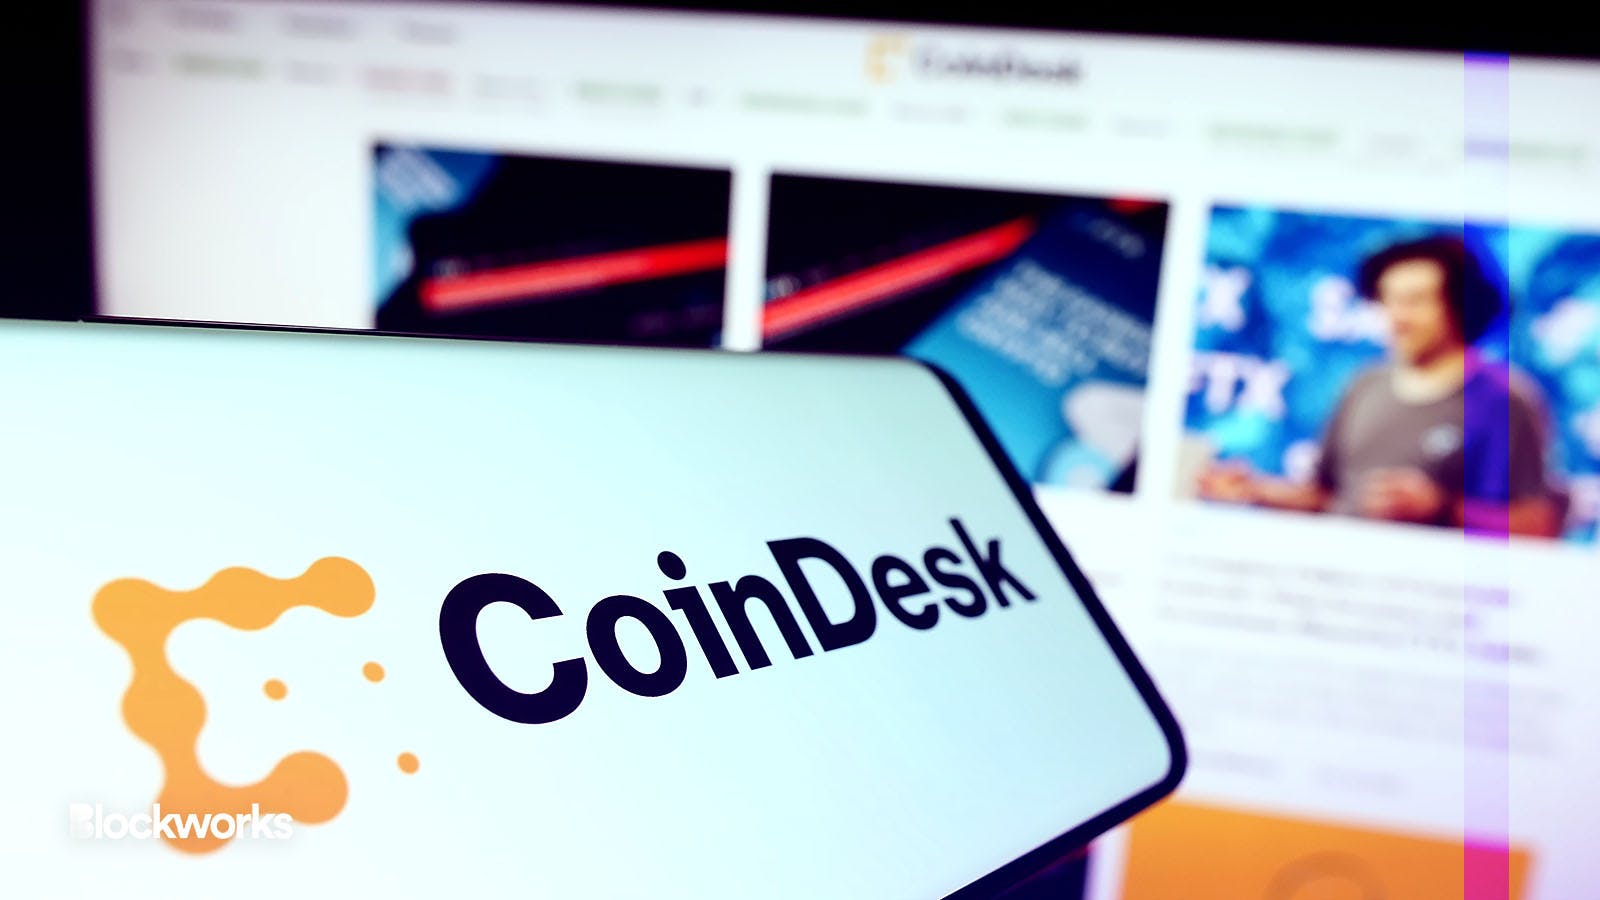 CoinMarketCap Acquisition of CoinDesk 'On Hold' - Blockworks